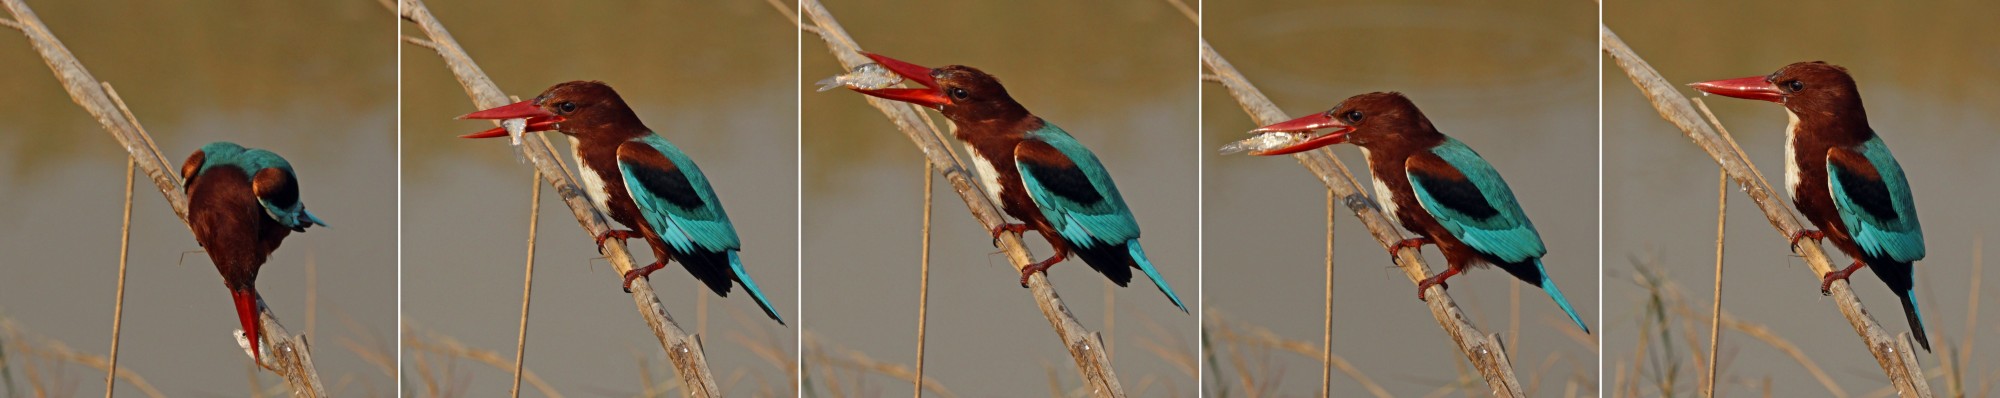 White-throated kingfisher (Halcyon smyrnensis fusca) composite